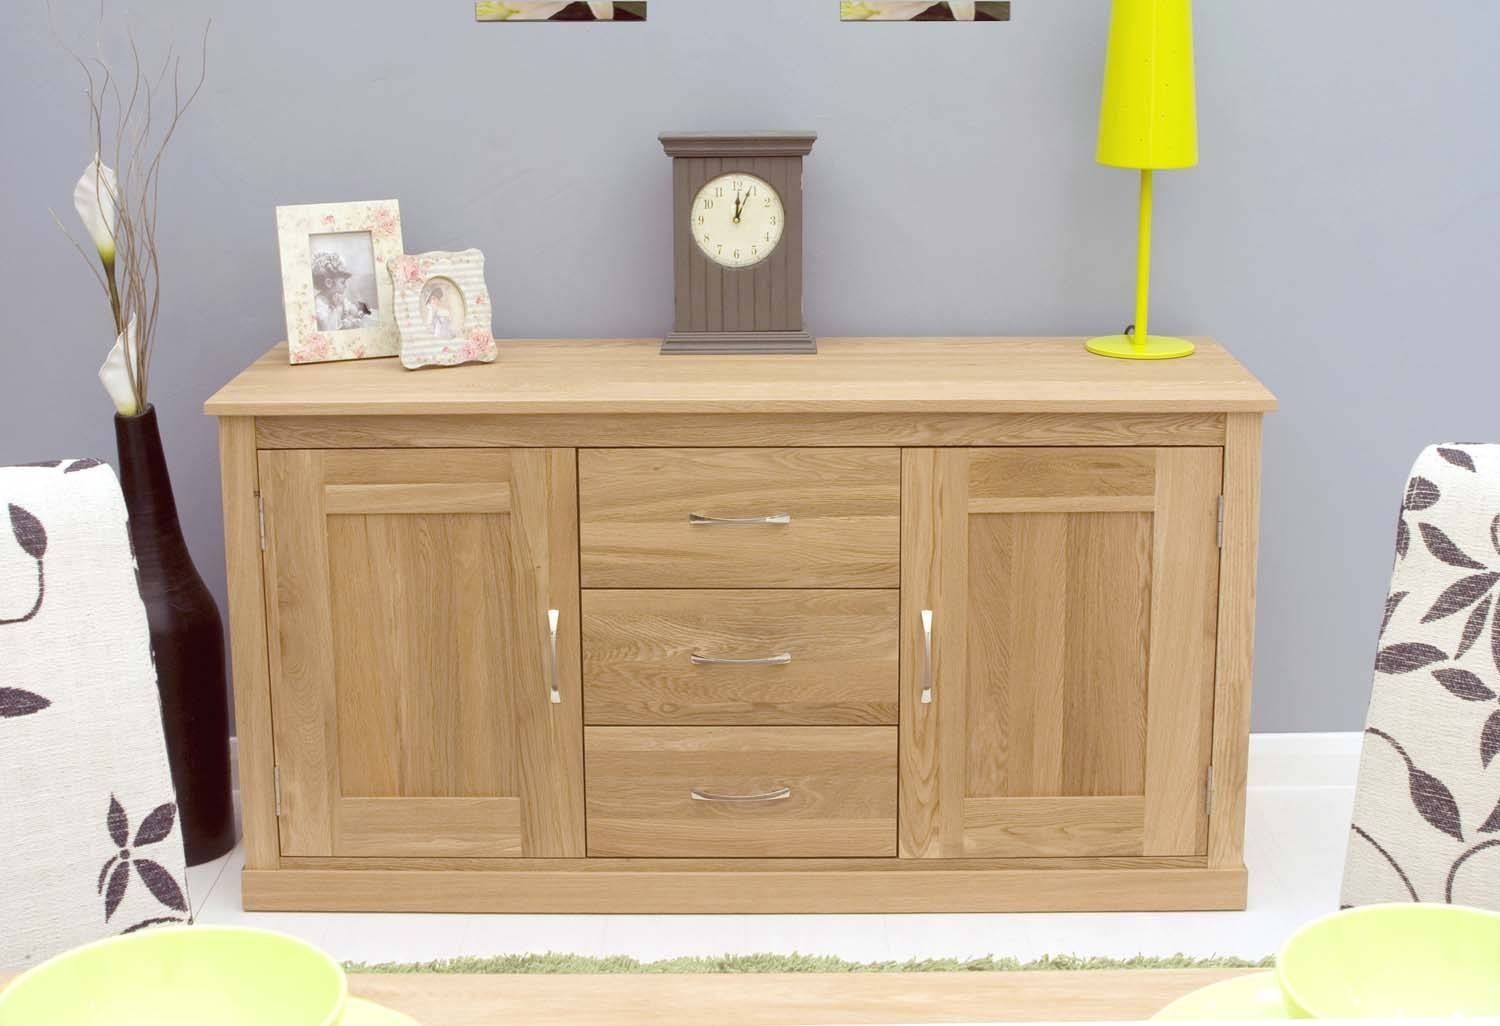 Modern Light Oak Sideboards And Console Table | Solid Oak For Most Popular Oak Furniture Sideboards (View 13 of 15)